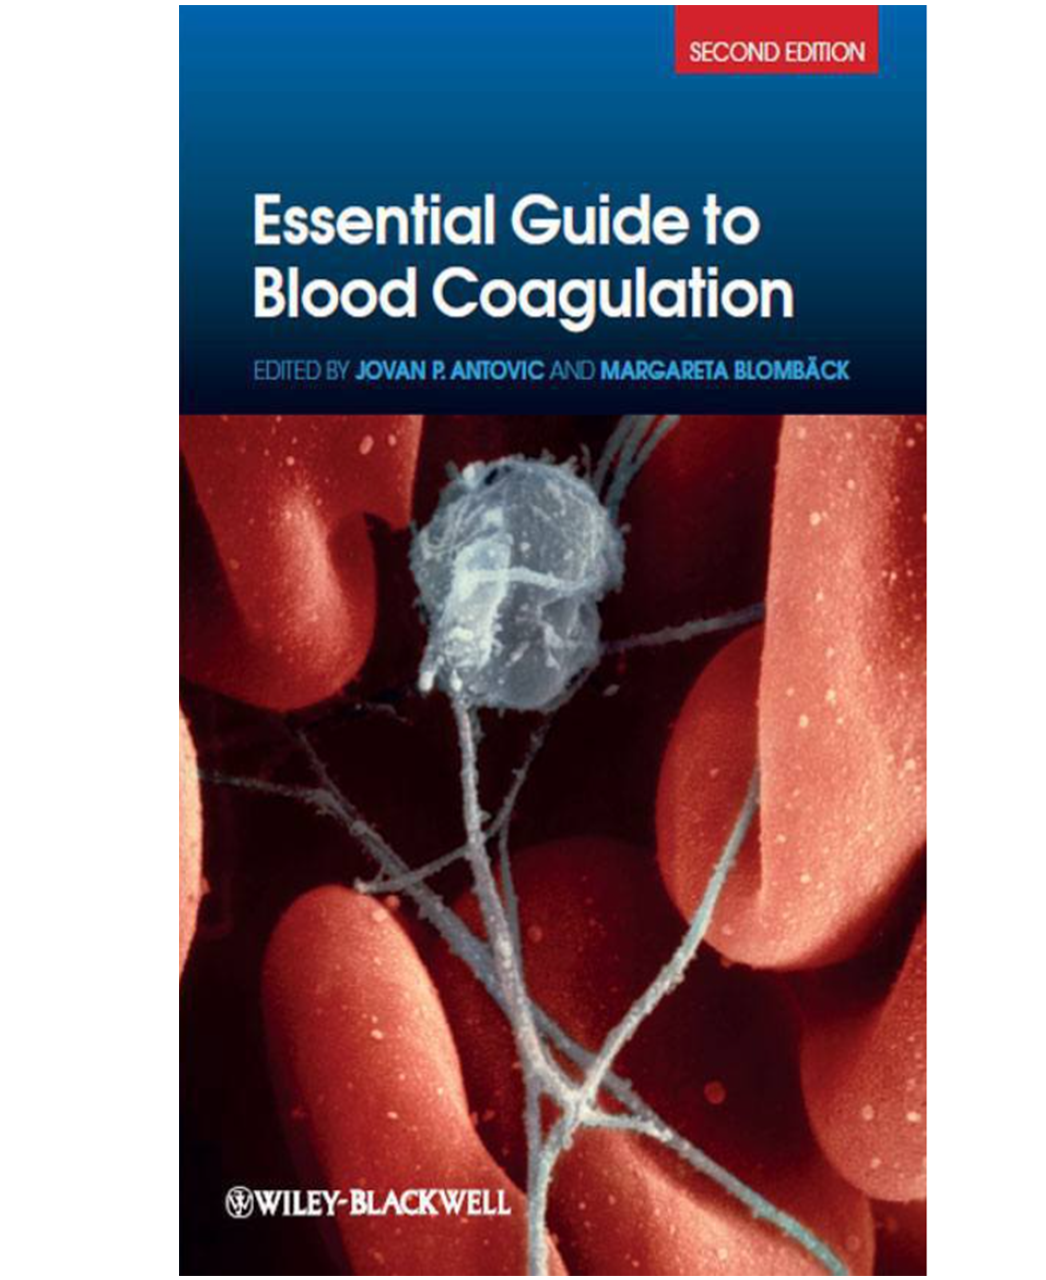 Essential Guide to Blood Coagulation